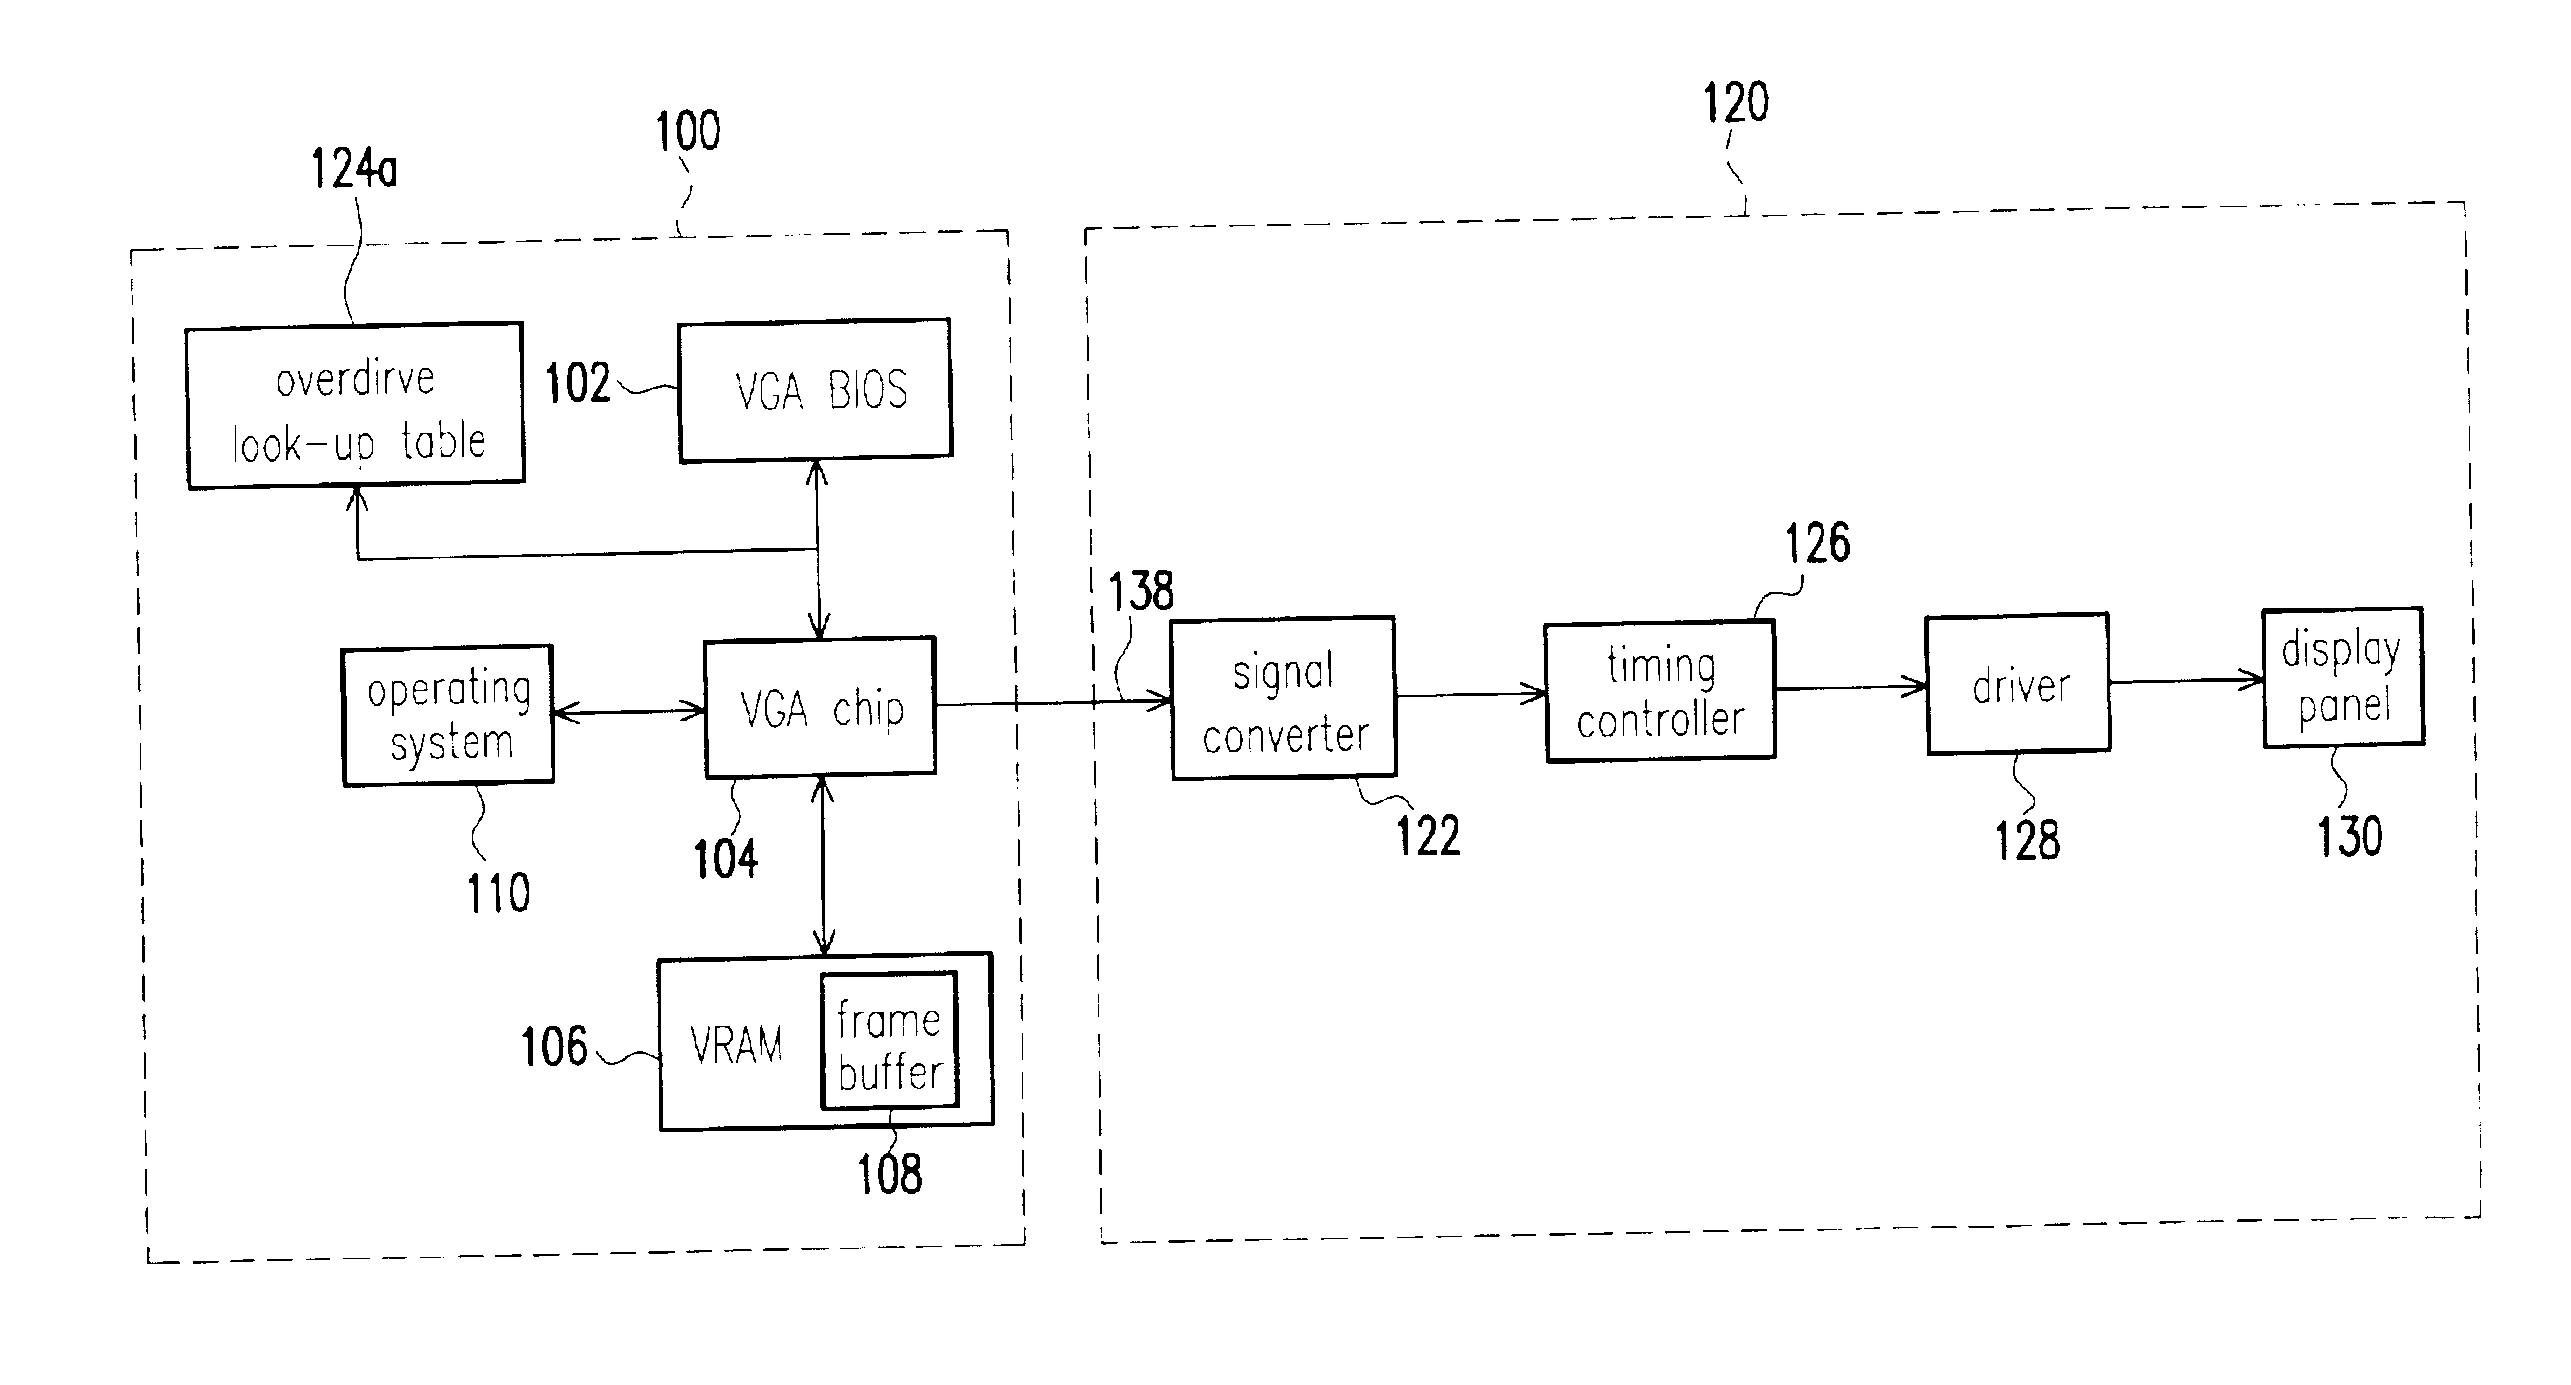 Overdrive system and method of operating overdrive system